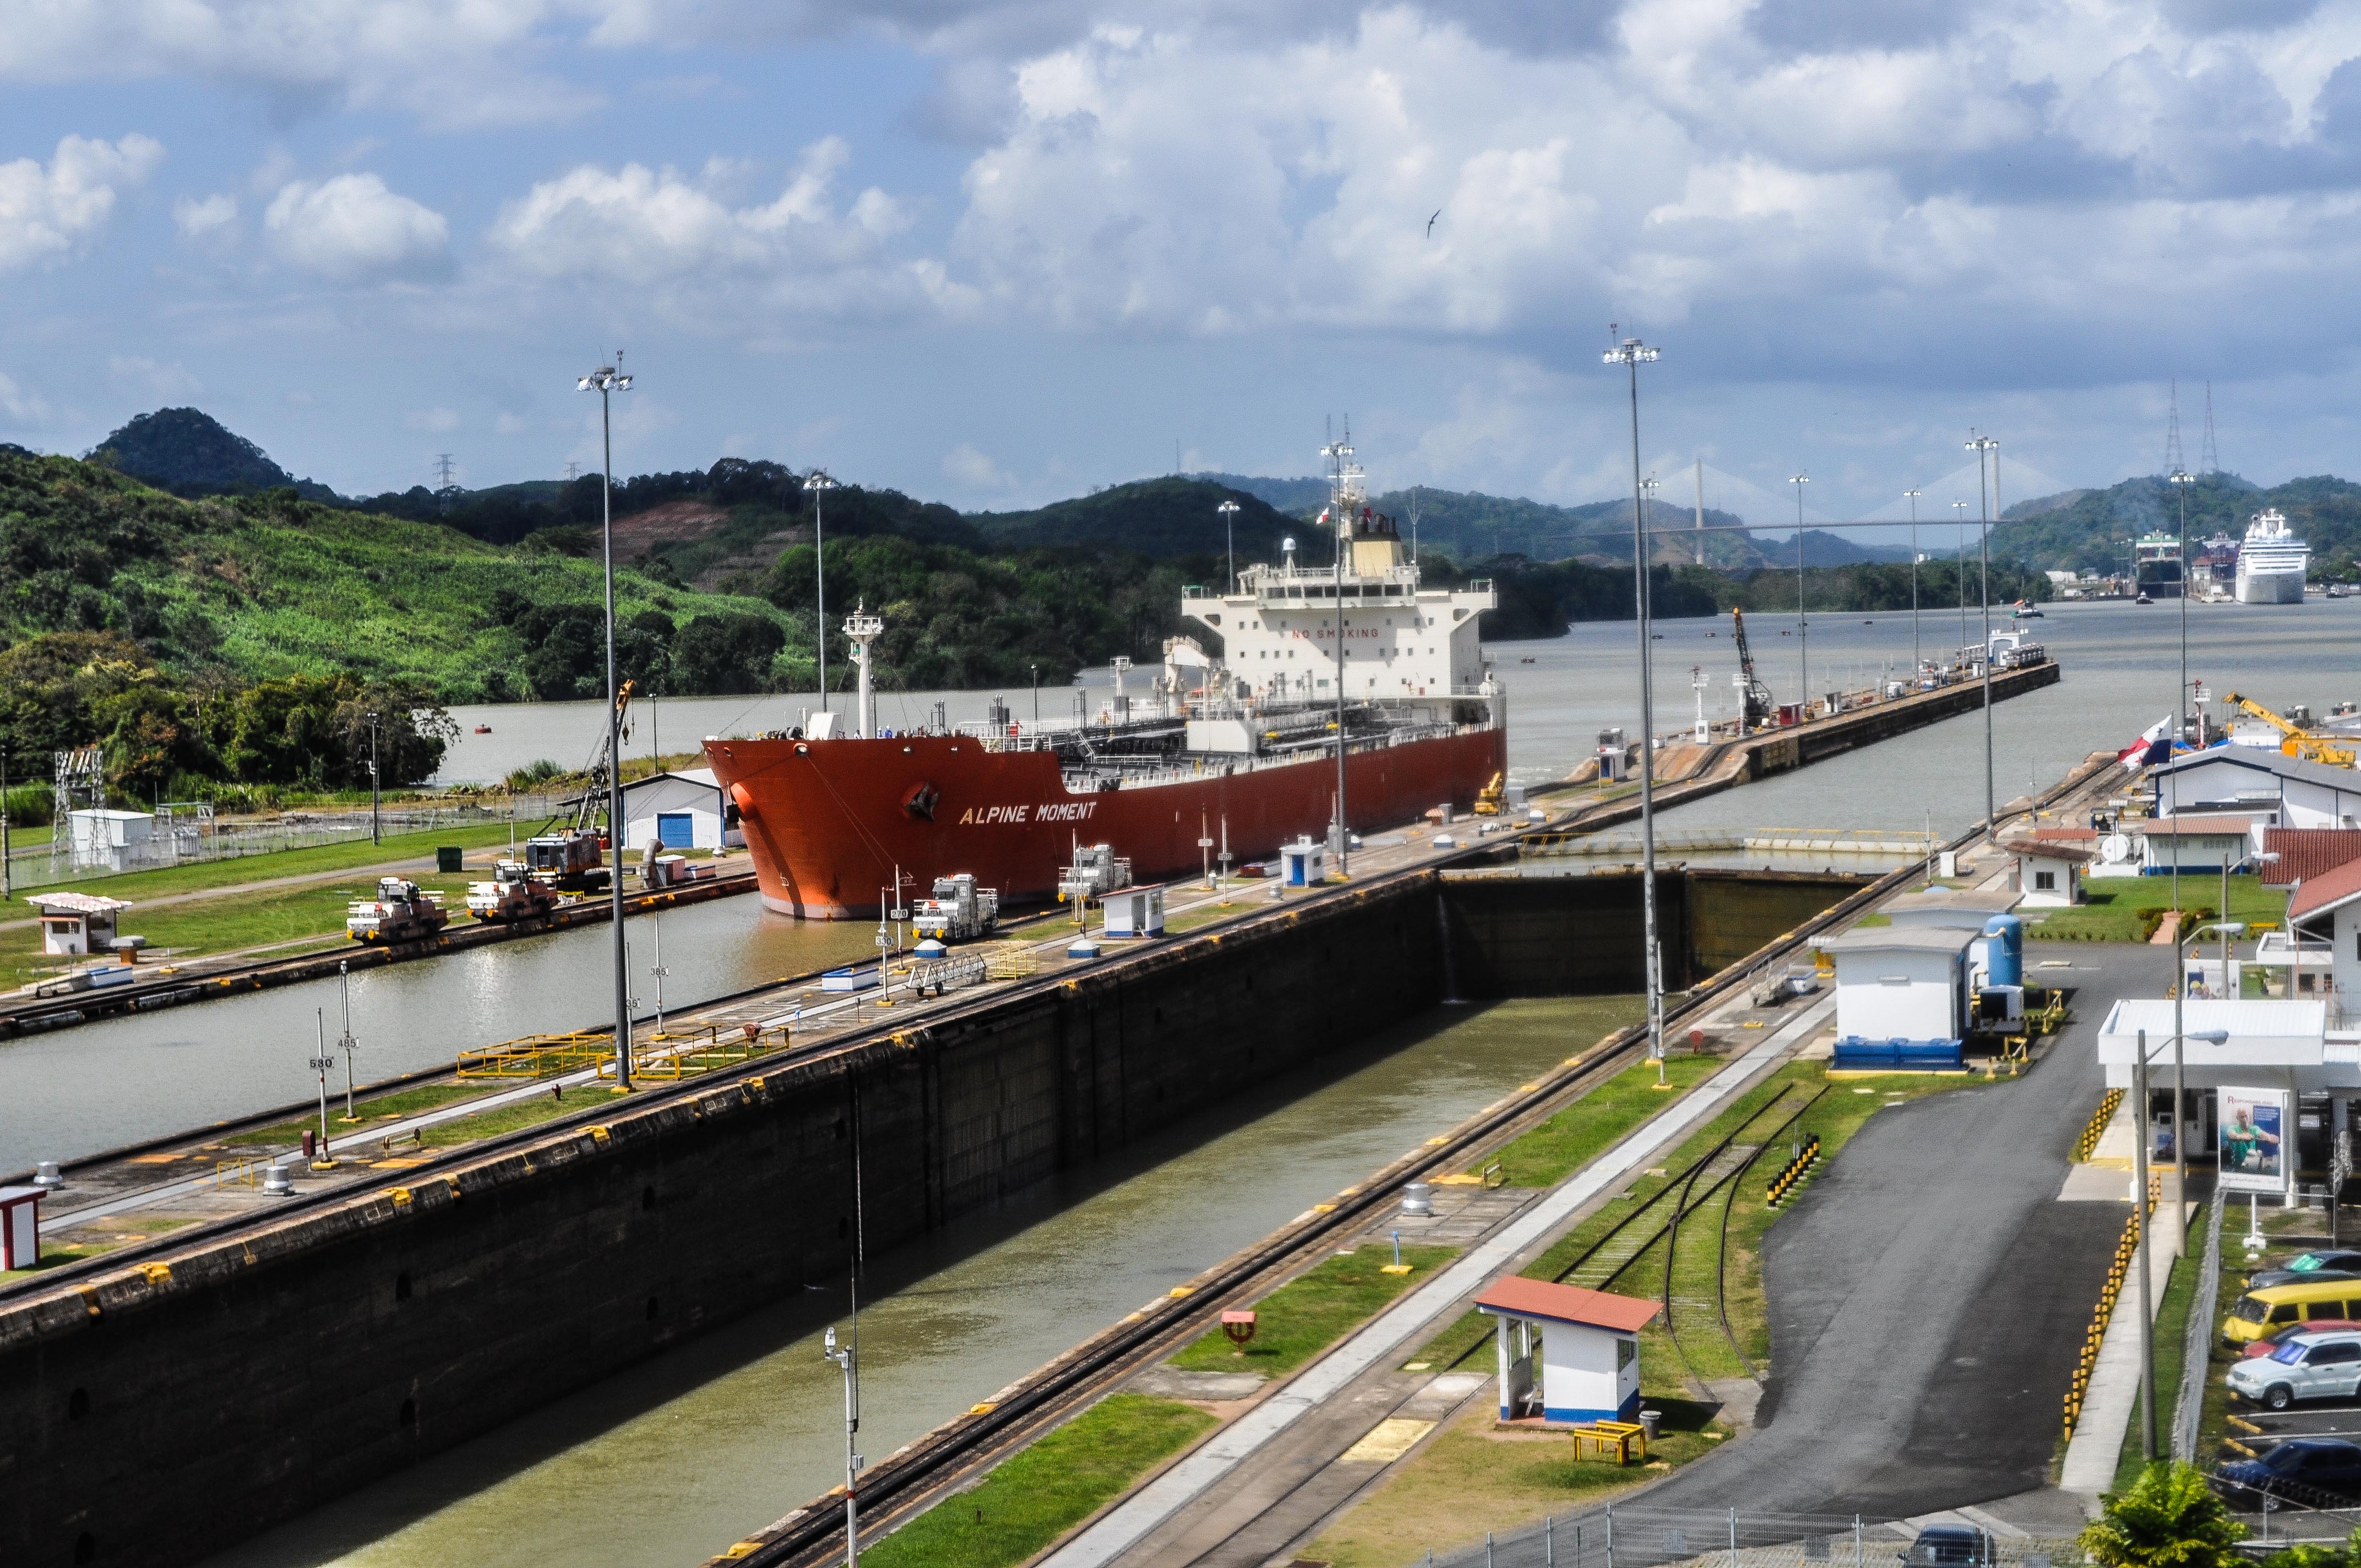 panama canal tour from airport